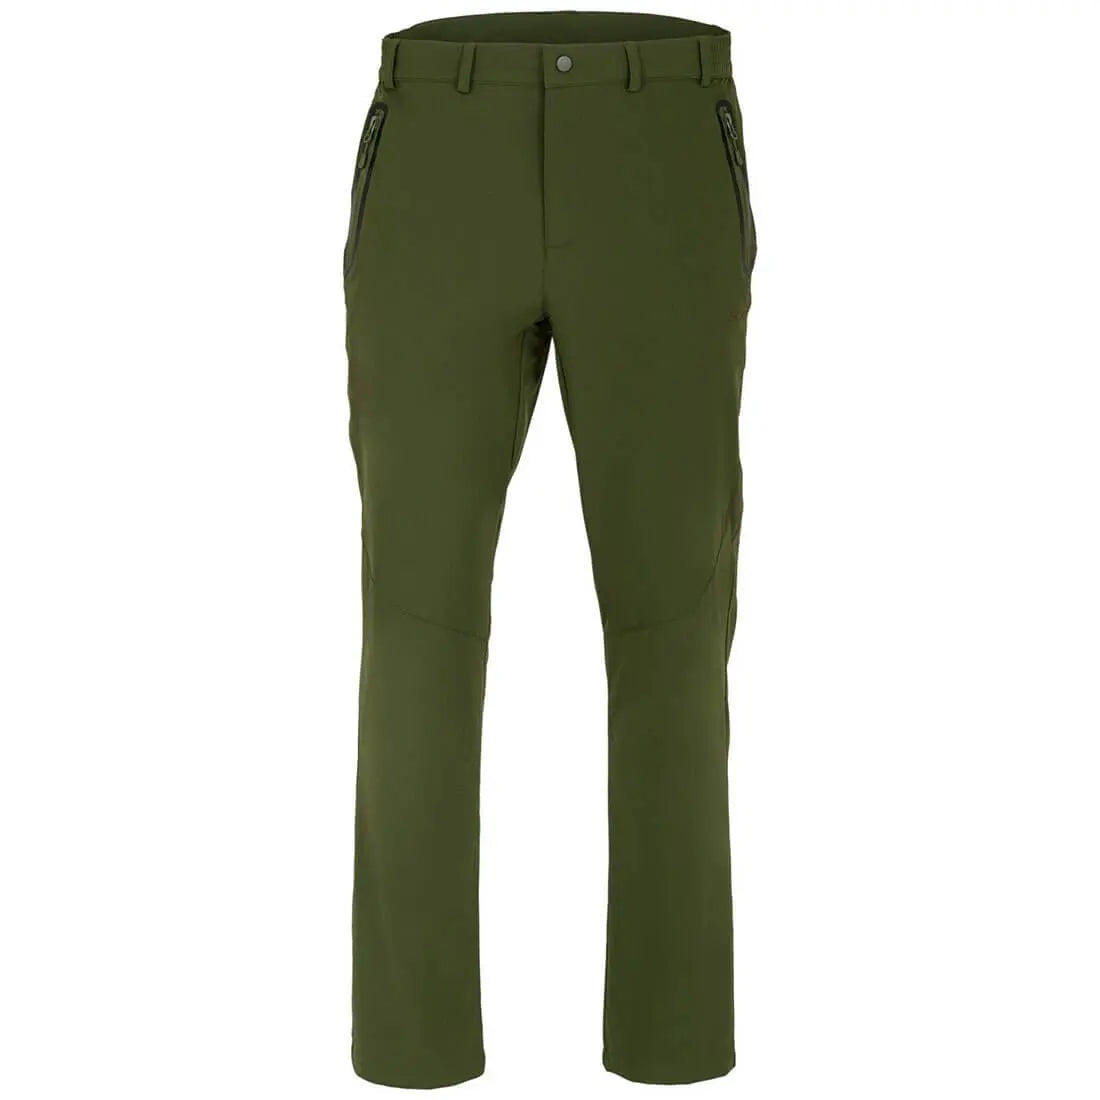 Vintage Red Tornado P 44 Military Highlander Trousers For Men Army Green  Workwear Pants With Relaxed Fit LJ201104 From Jiao02, $77.16 | DHgate.Com